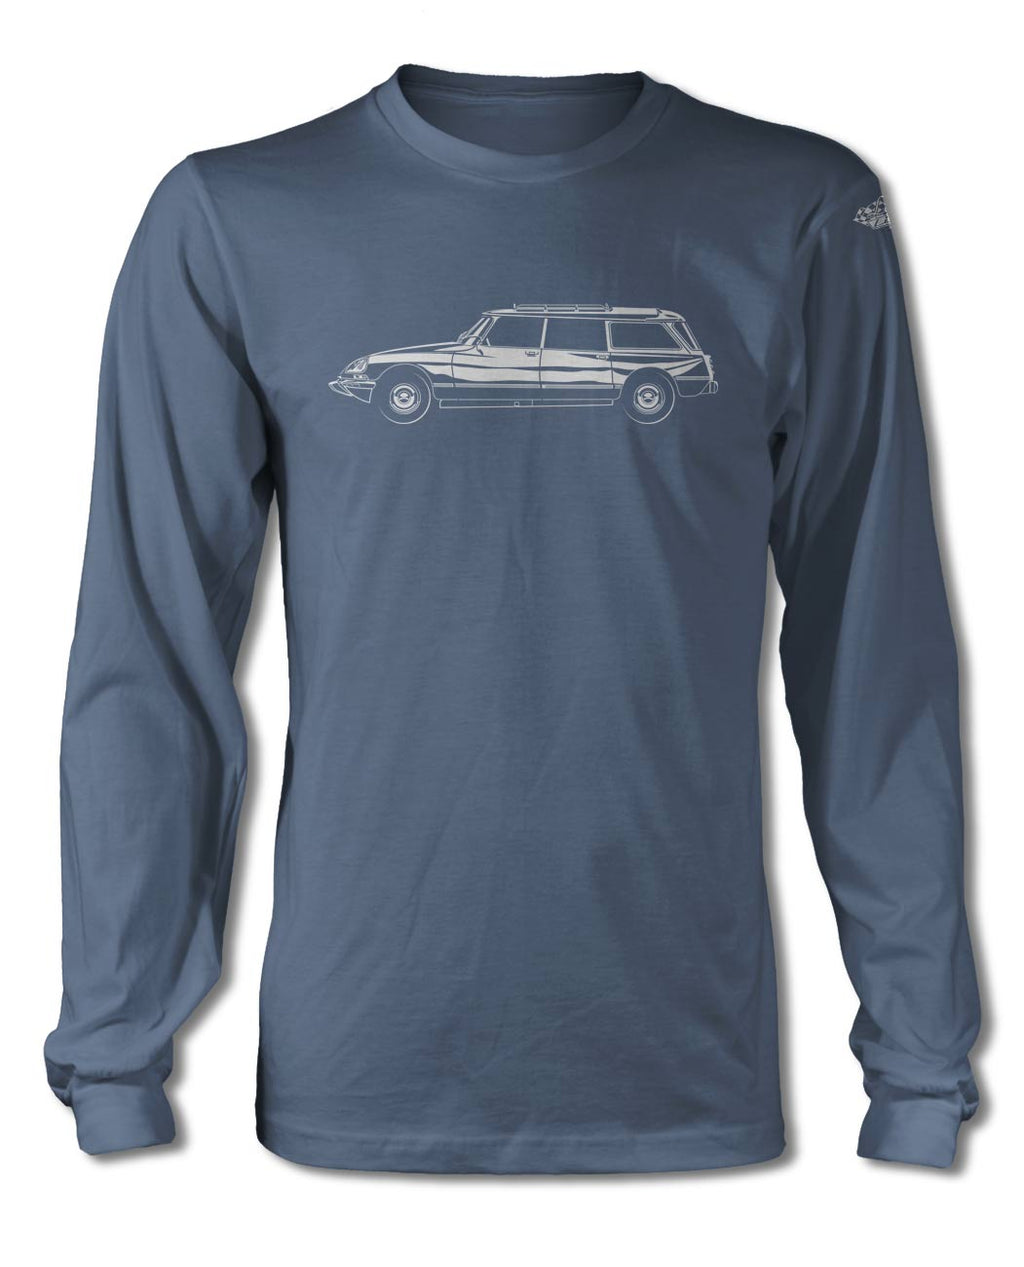 Citroen DS ID 1968 - 1976 Station Wagon T-Shirt - Long Sleeves - Side View